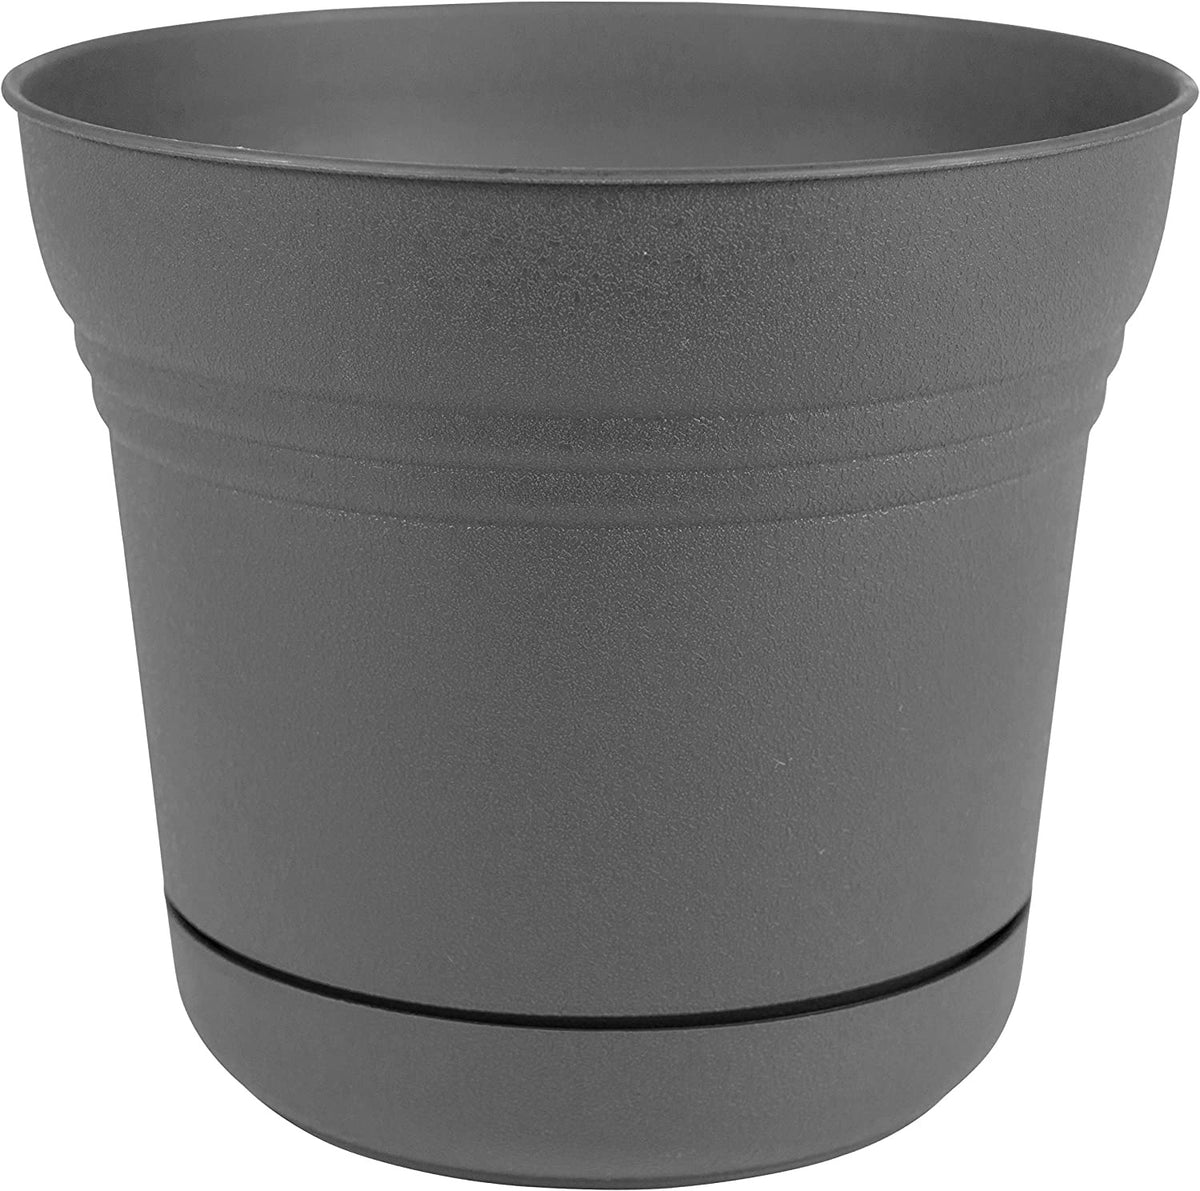 Bloem SP07908 Saturn Round Planter, Polyresin, Charcoal, 7 Inch